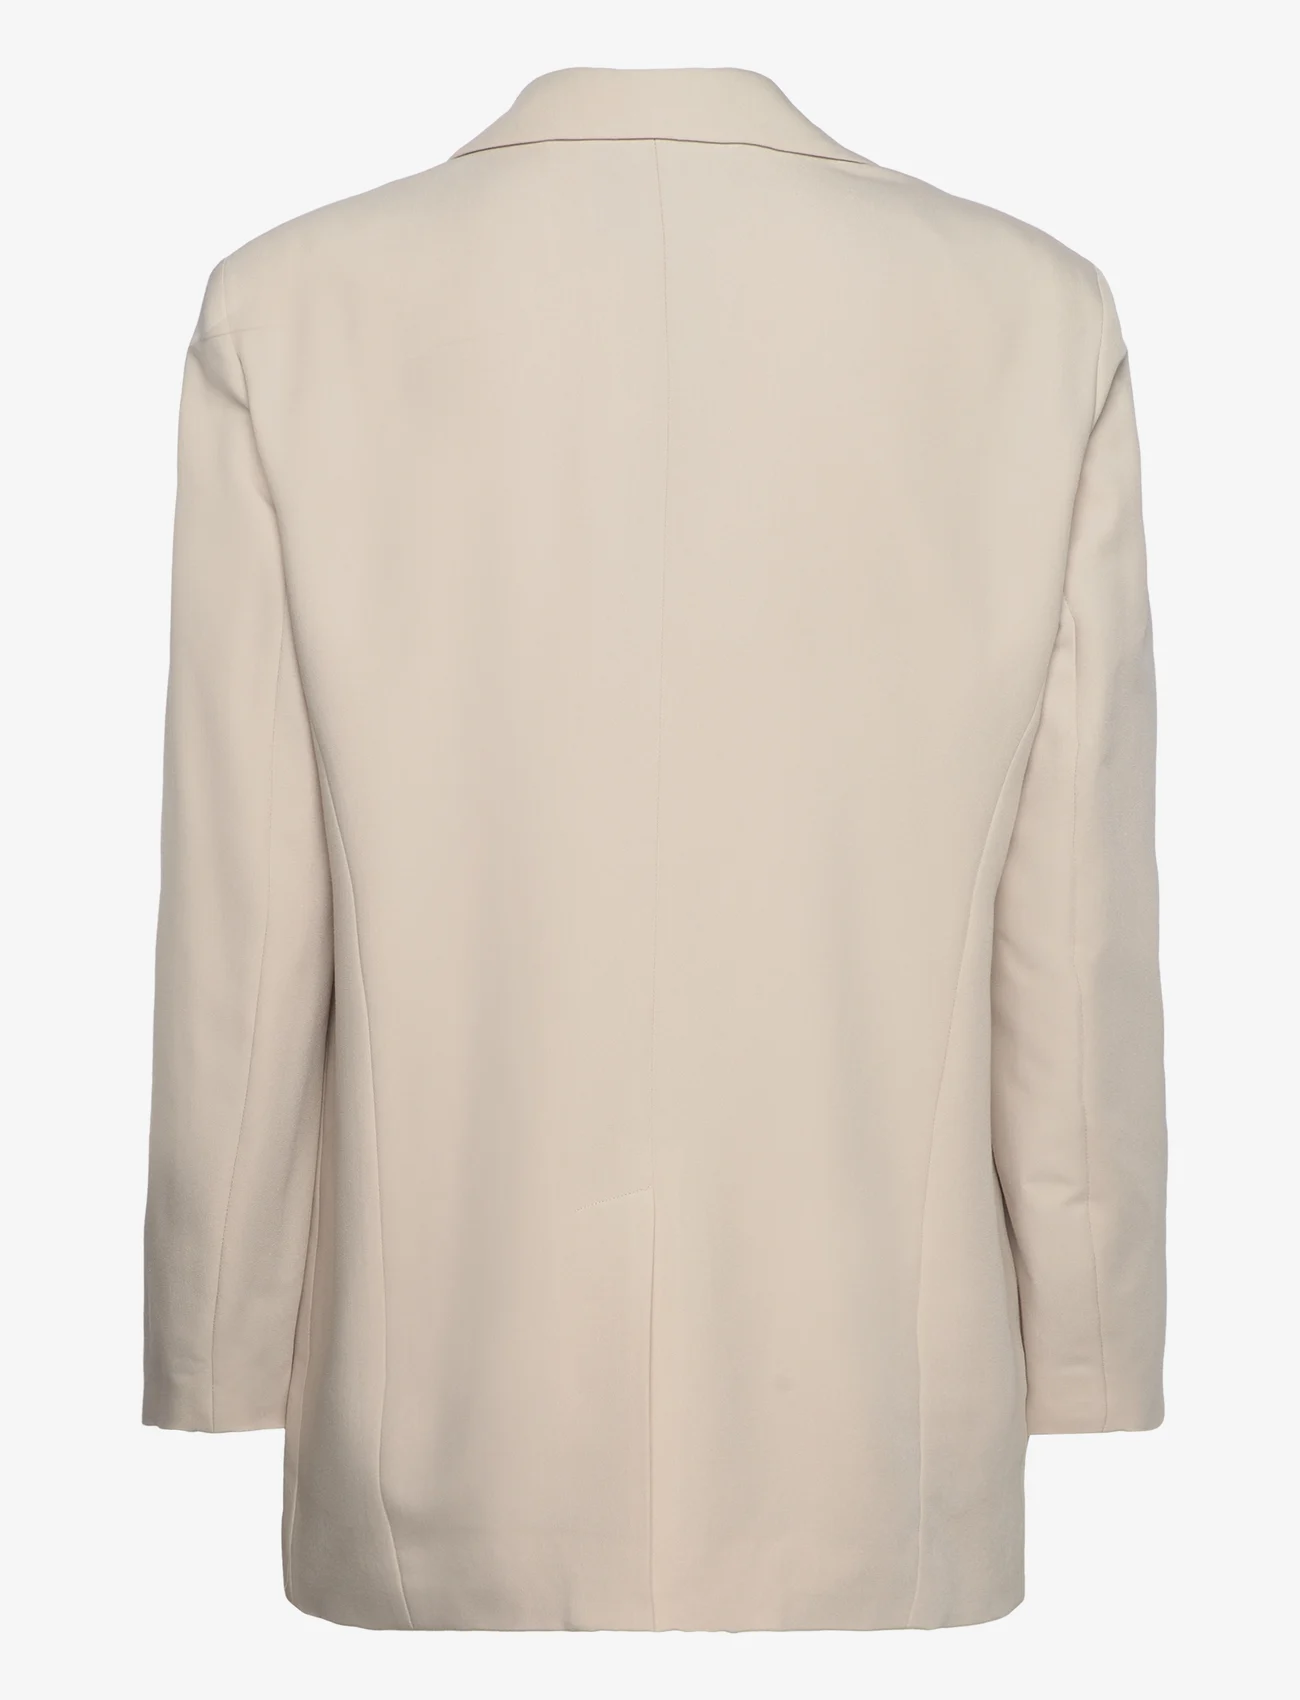 Twist & Tango - Bailey Blazer - party wear at outlet prices - lt beige - 1